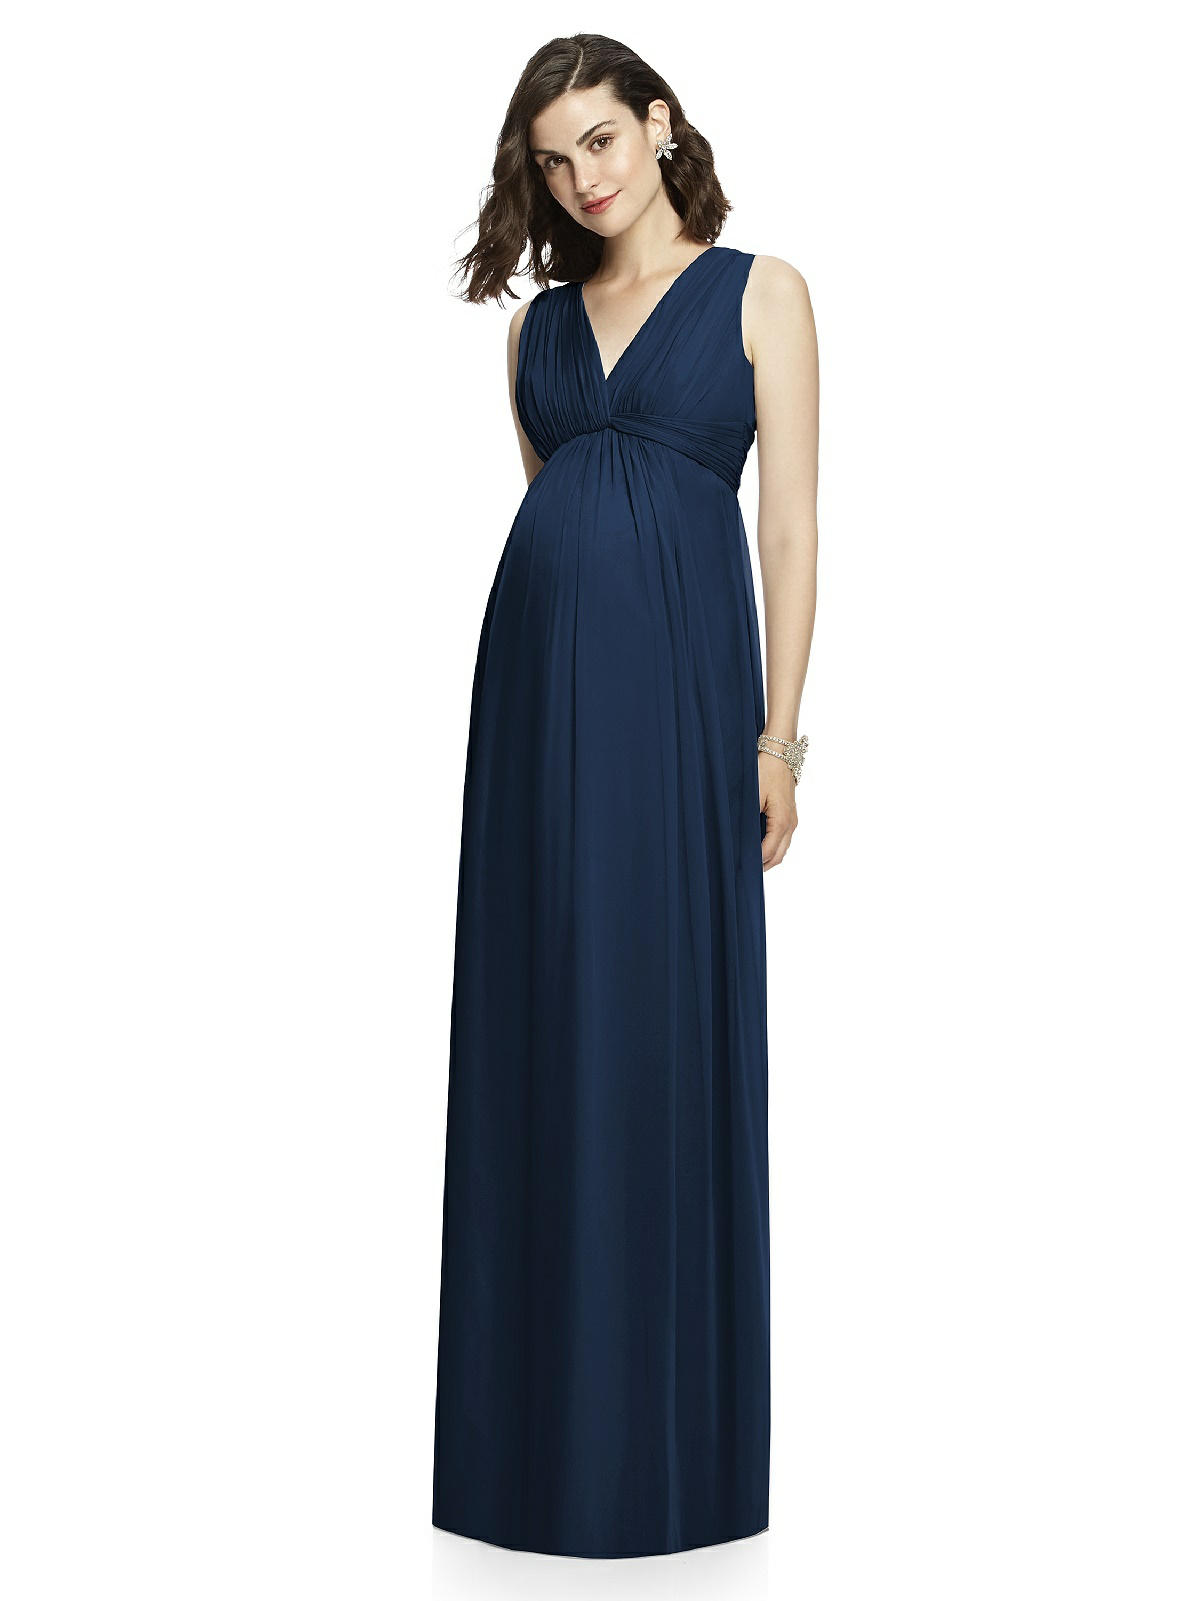 Rylee Maternity Bridesmaid Dress by Dessy - Midnight Blue